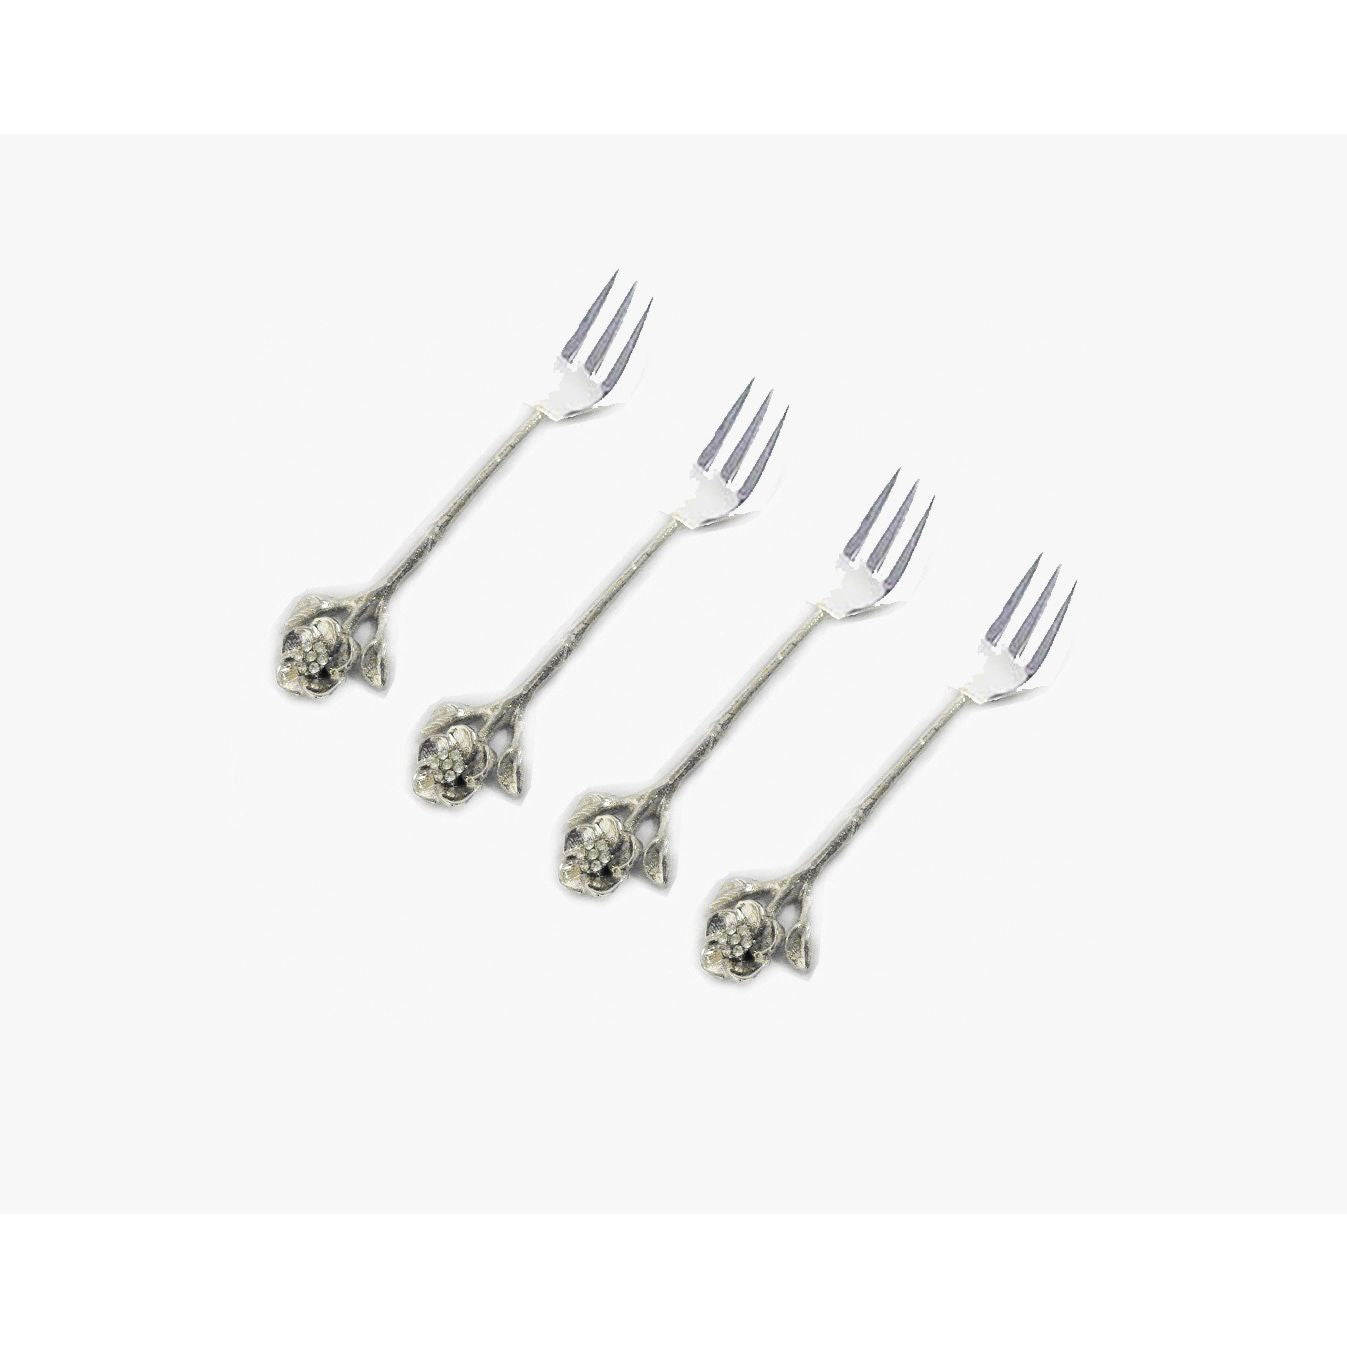 Classic Touch Decor Set Of 4 Silver Forks Jeweled Flower, Stainless Steel, 6"